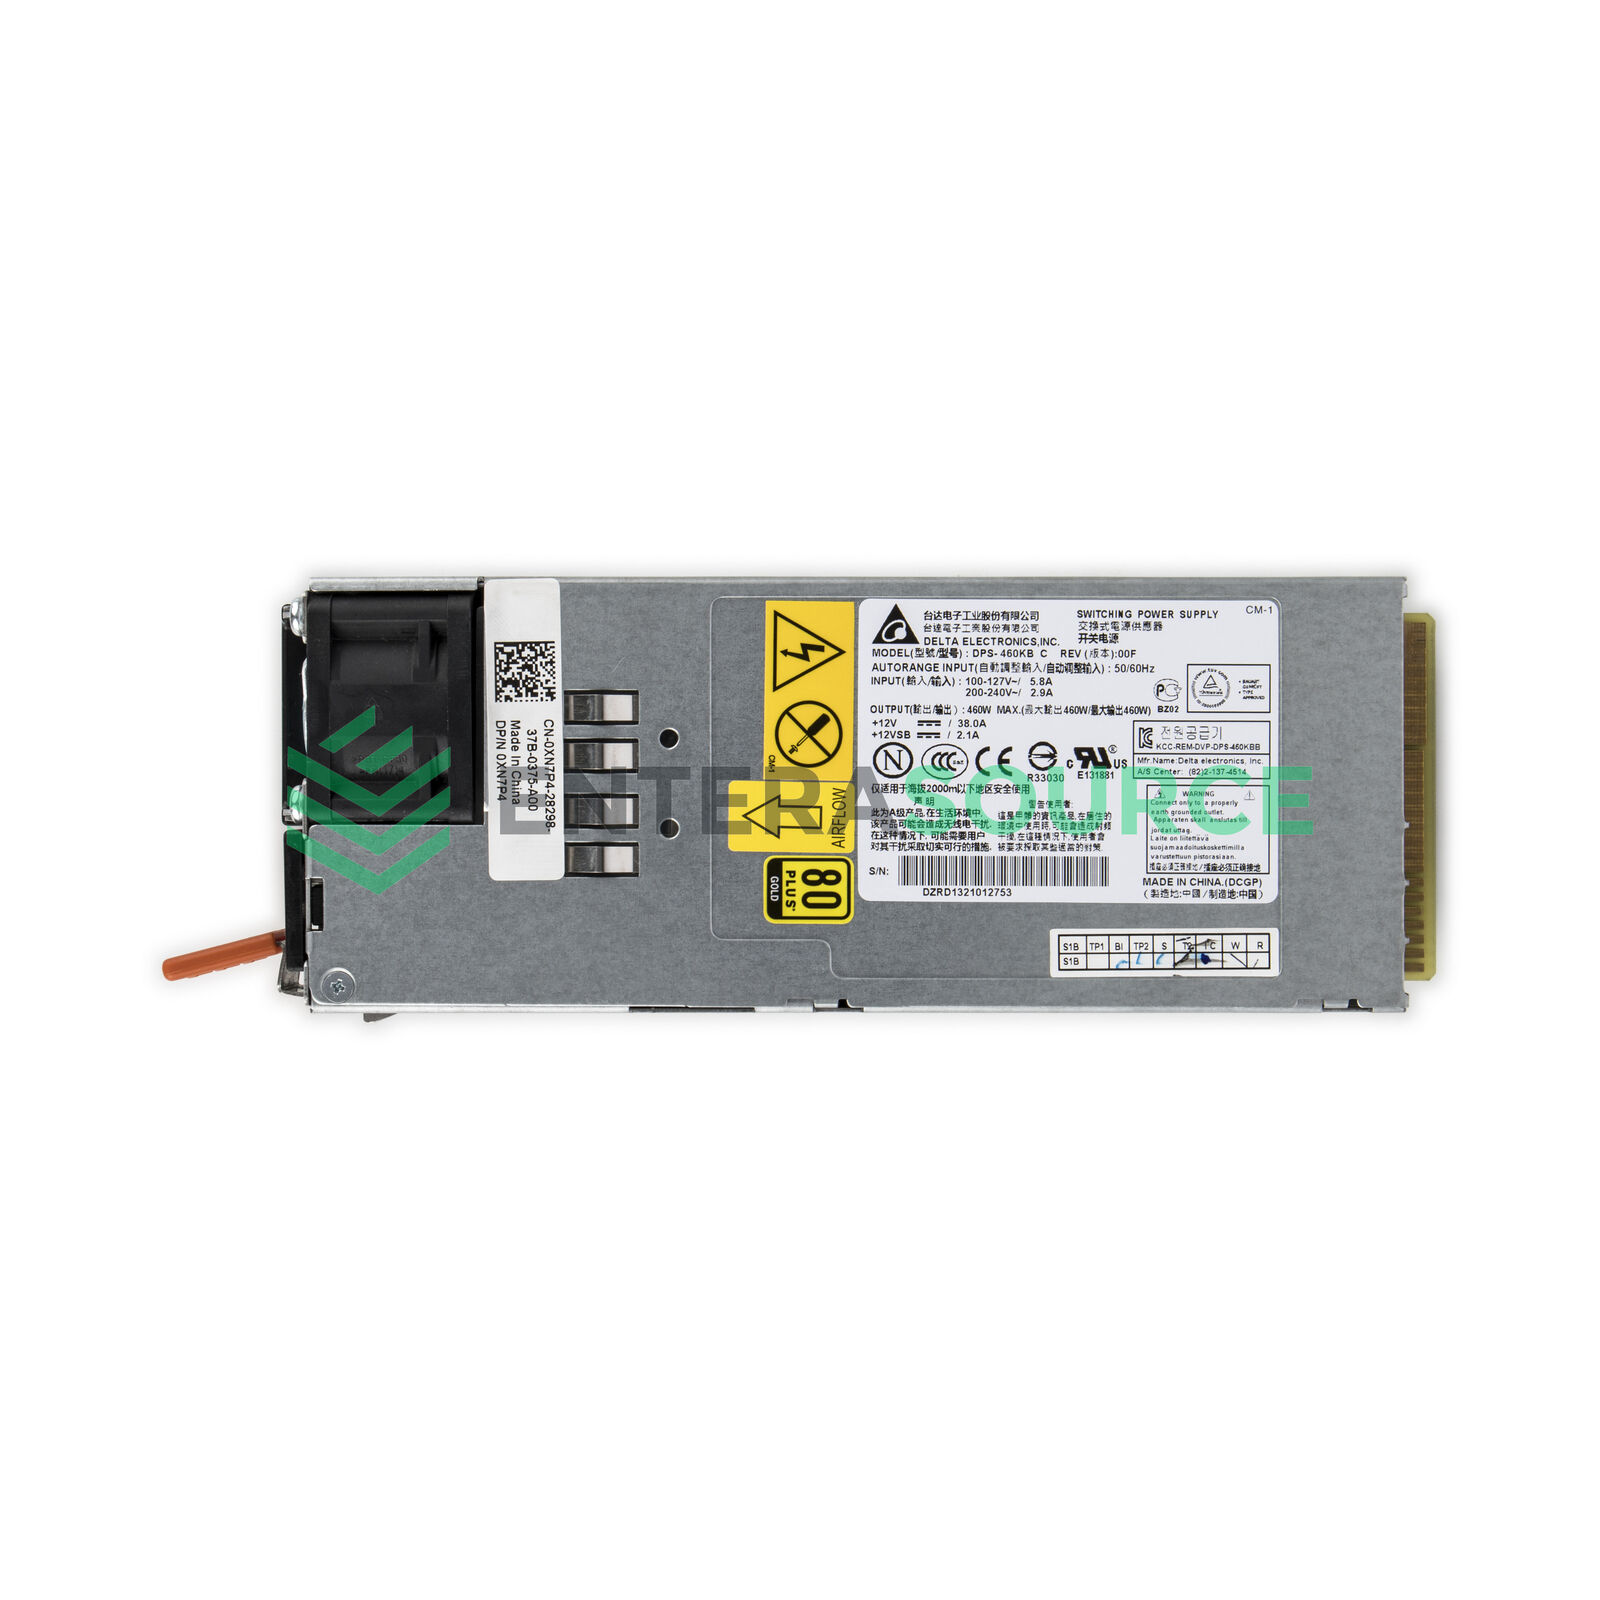 Dell XN7P4 PowerConnect 8100 series Networking N4000 series 460W 80+ Gold AC ...